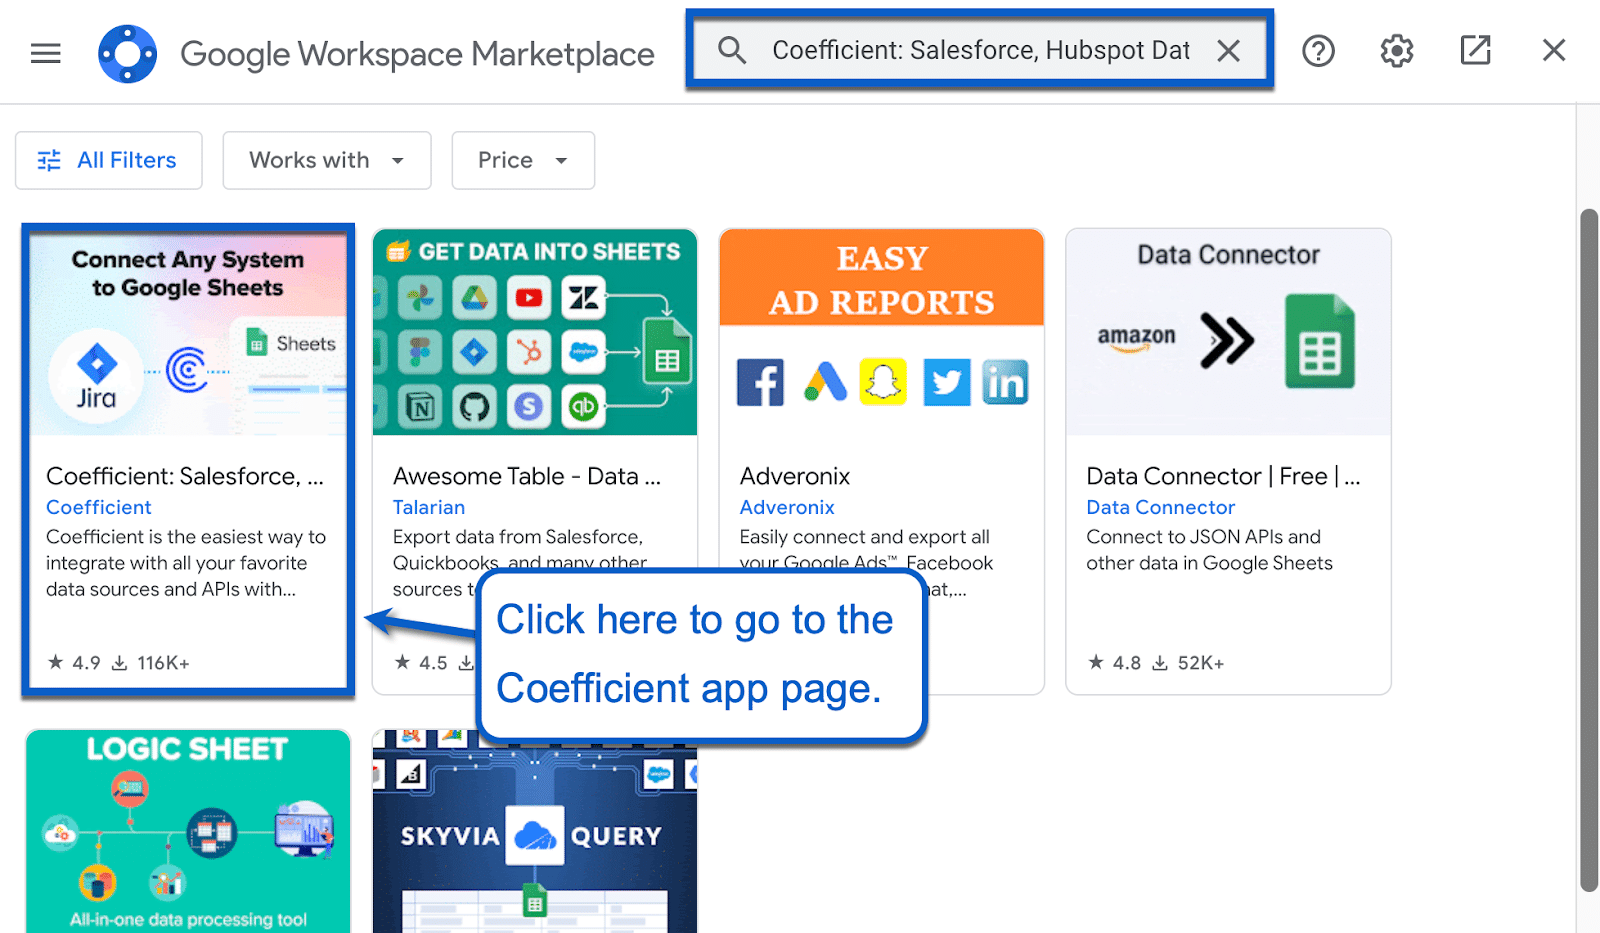 Look for "Coefficient: Salesforce, HubSpot Data Connector" in the Google Workspace Marketplace